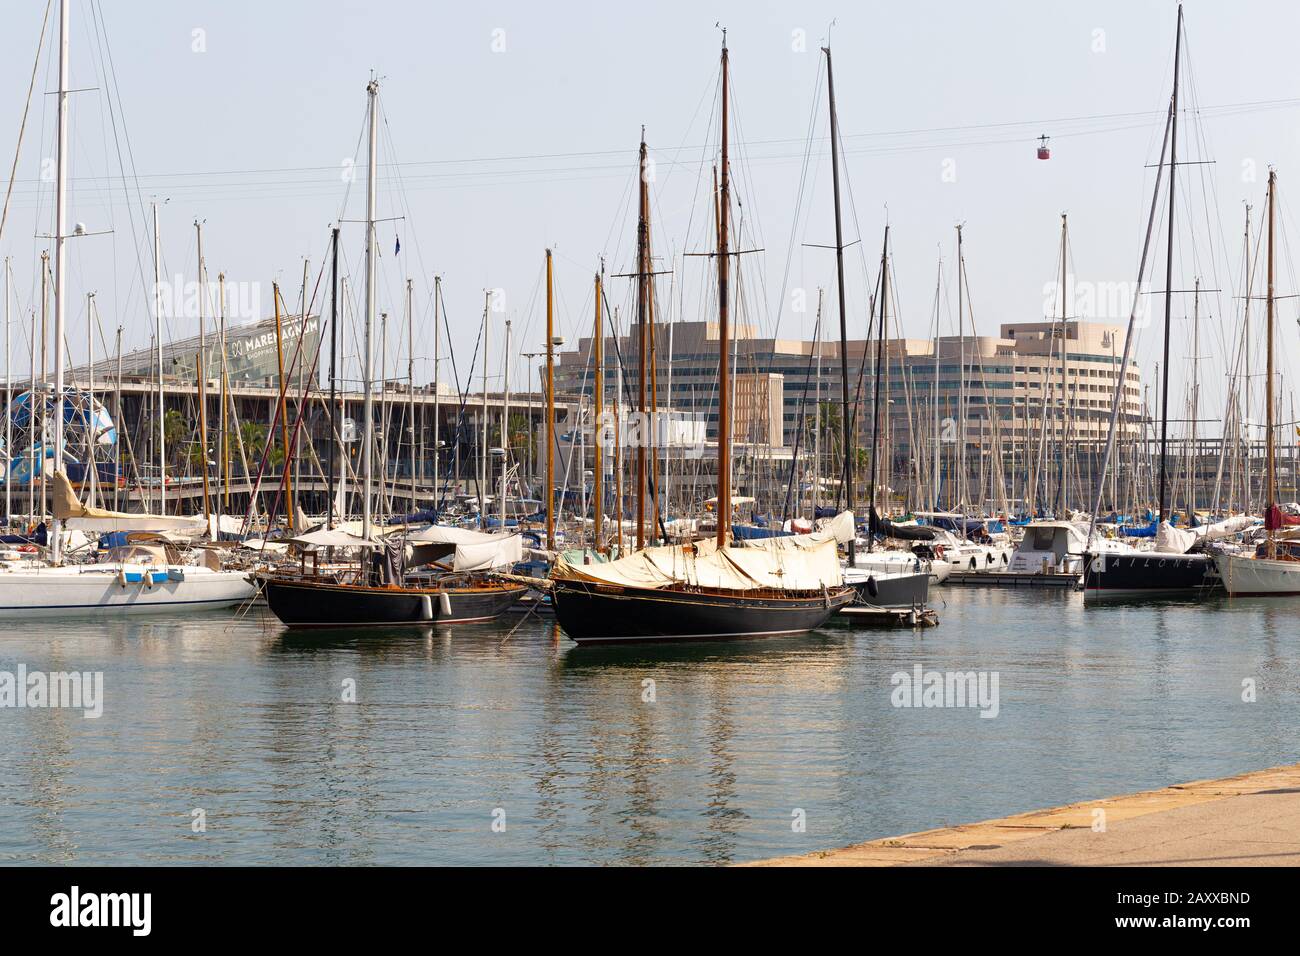 BARSELONA, SPAIN - AUGUST 6, 2019: Yachts parked in the port of Barcelona at summer noon. Stock Photo